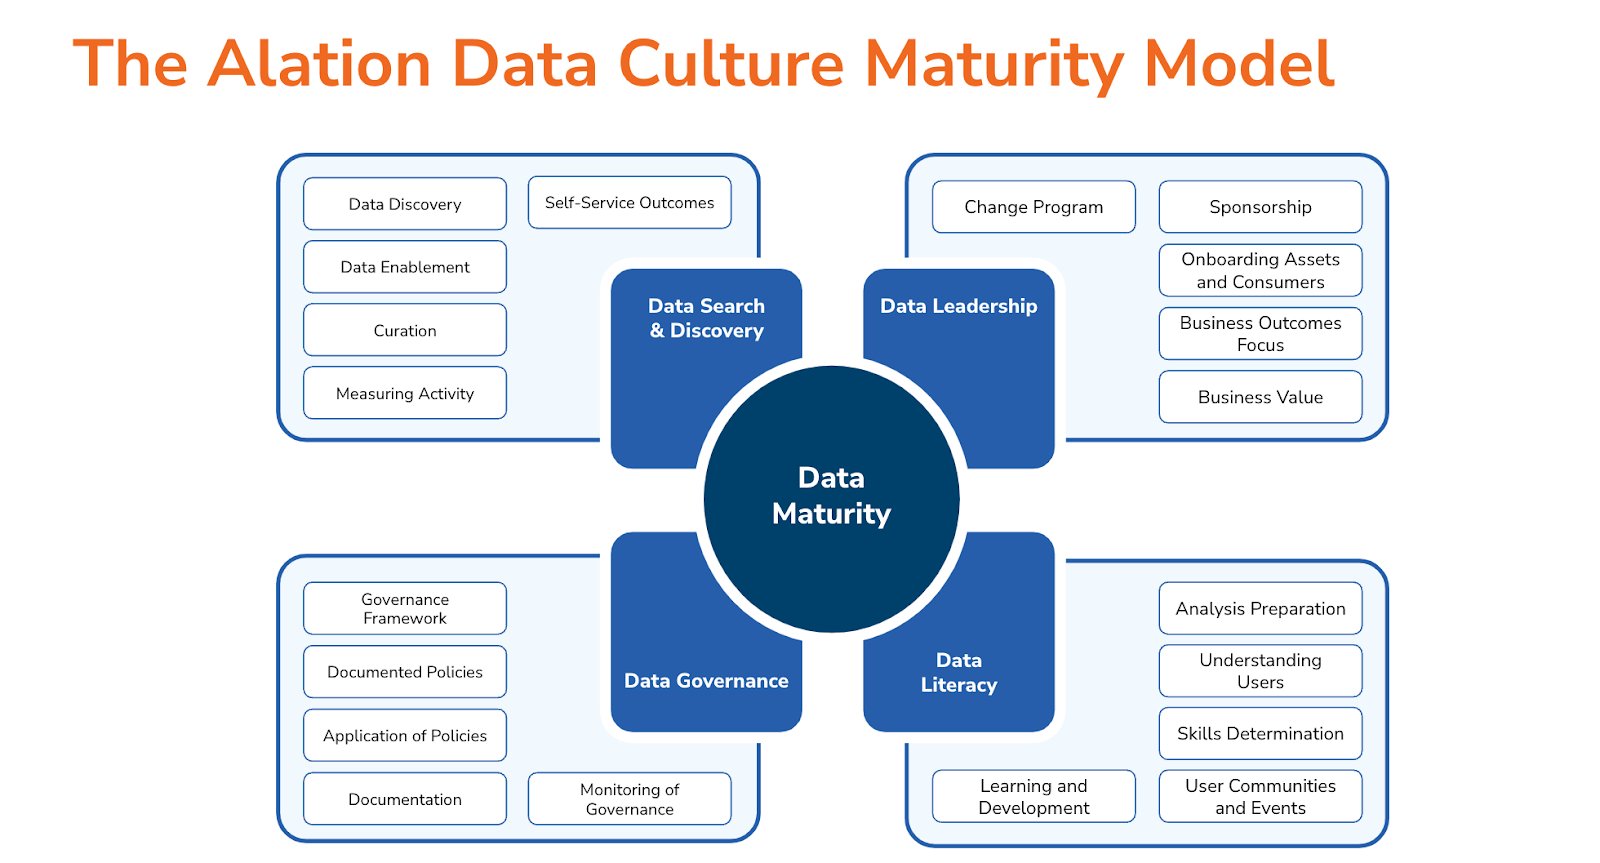 Graphic displaying the Alation Data Culture Maturity Model